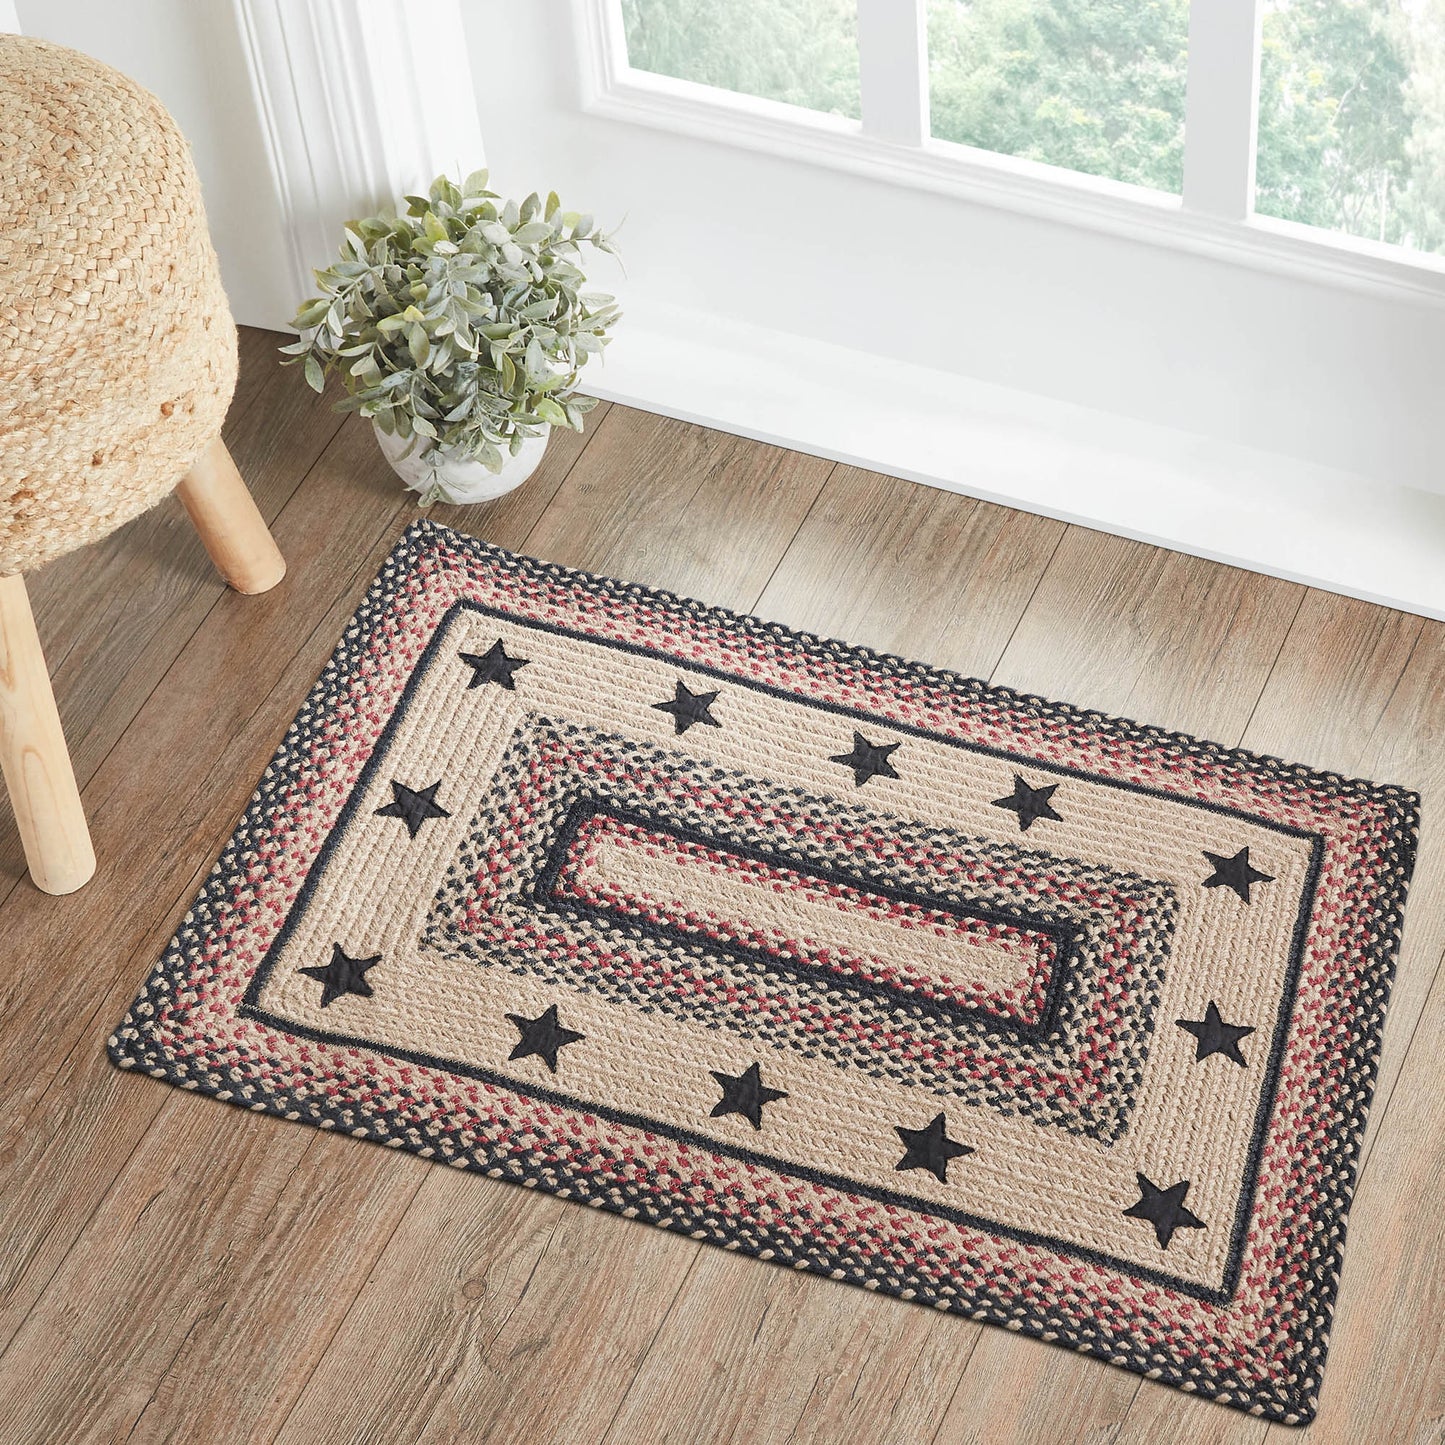 81334-Colonial-Star-Jute-Rug-Rect-w-Pad-24x36-image-7